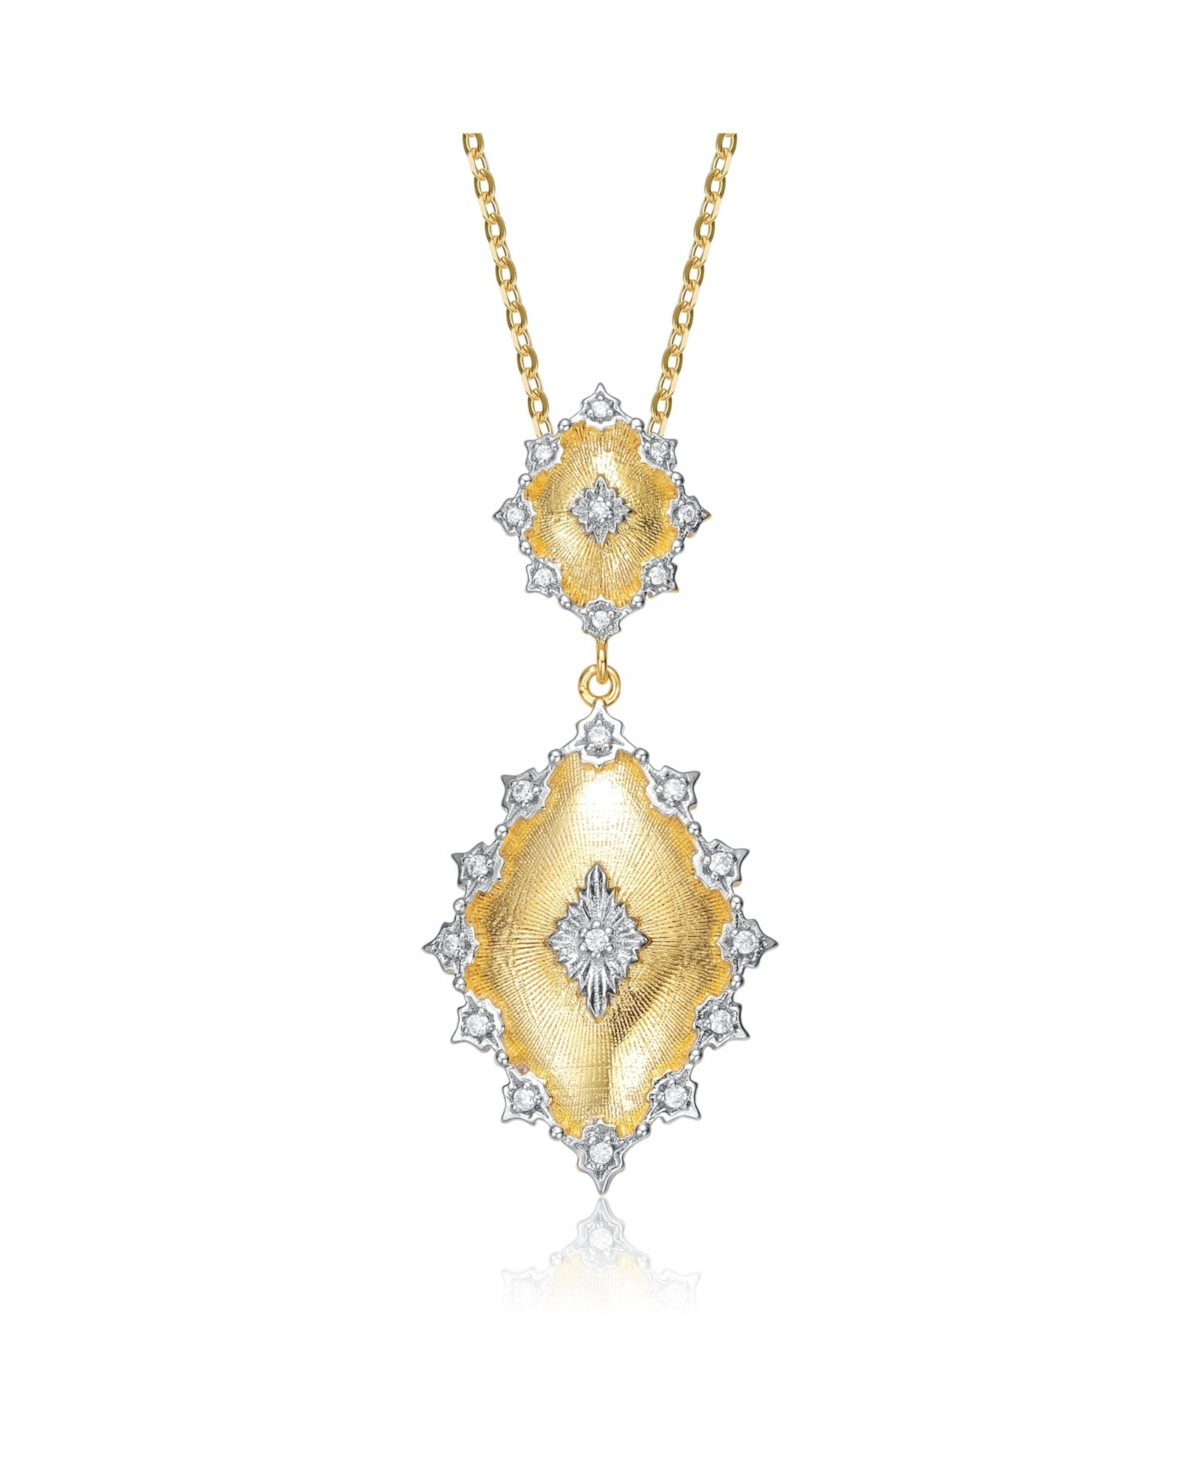 White Gold and 14K Gold Plated Cubic Zirconia Designed Pendant Necklace - Gold